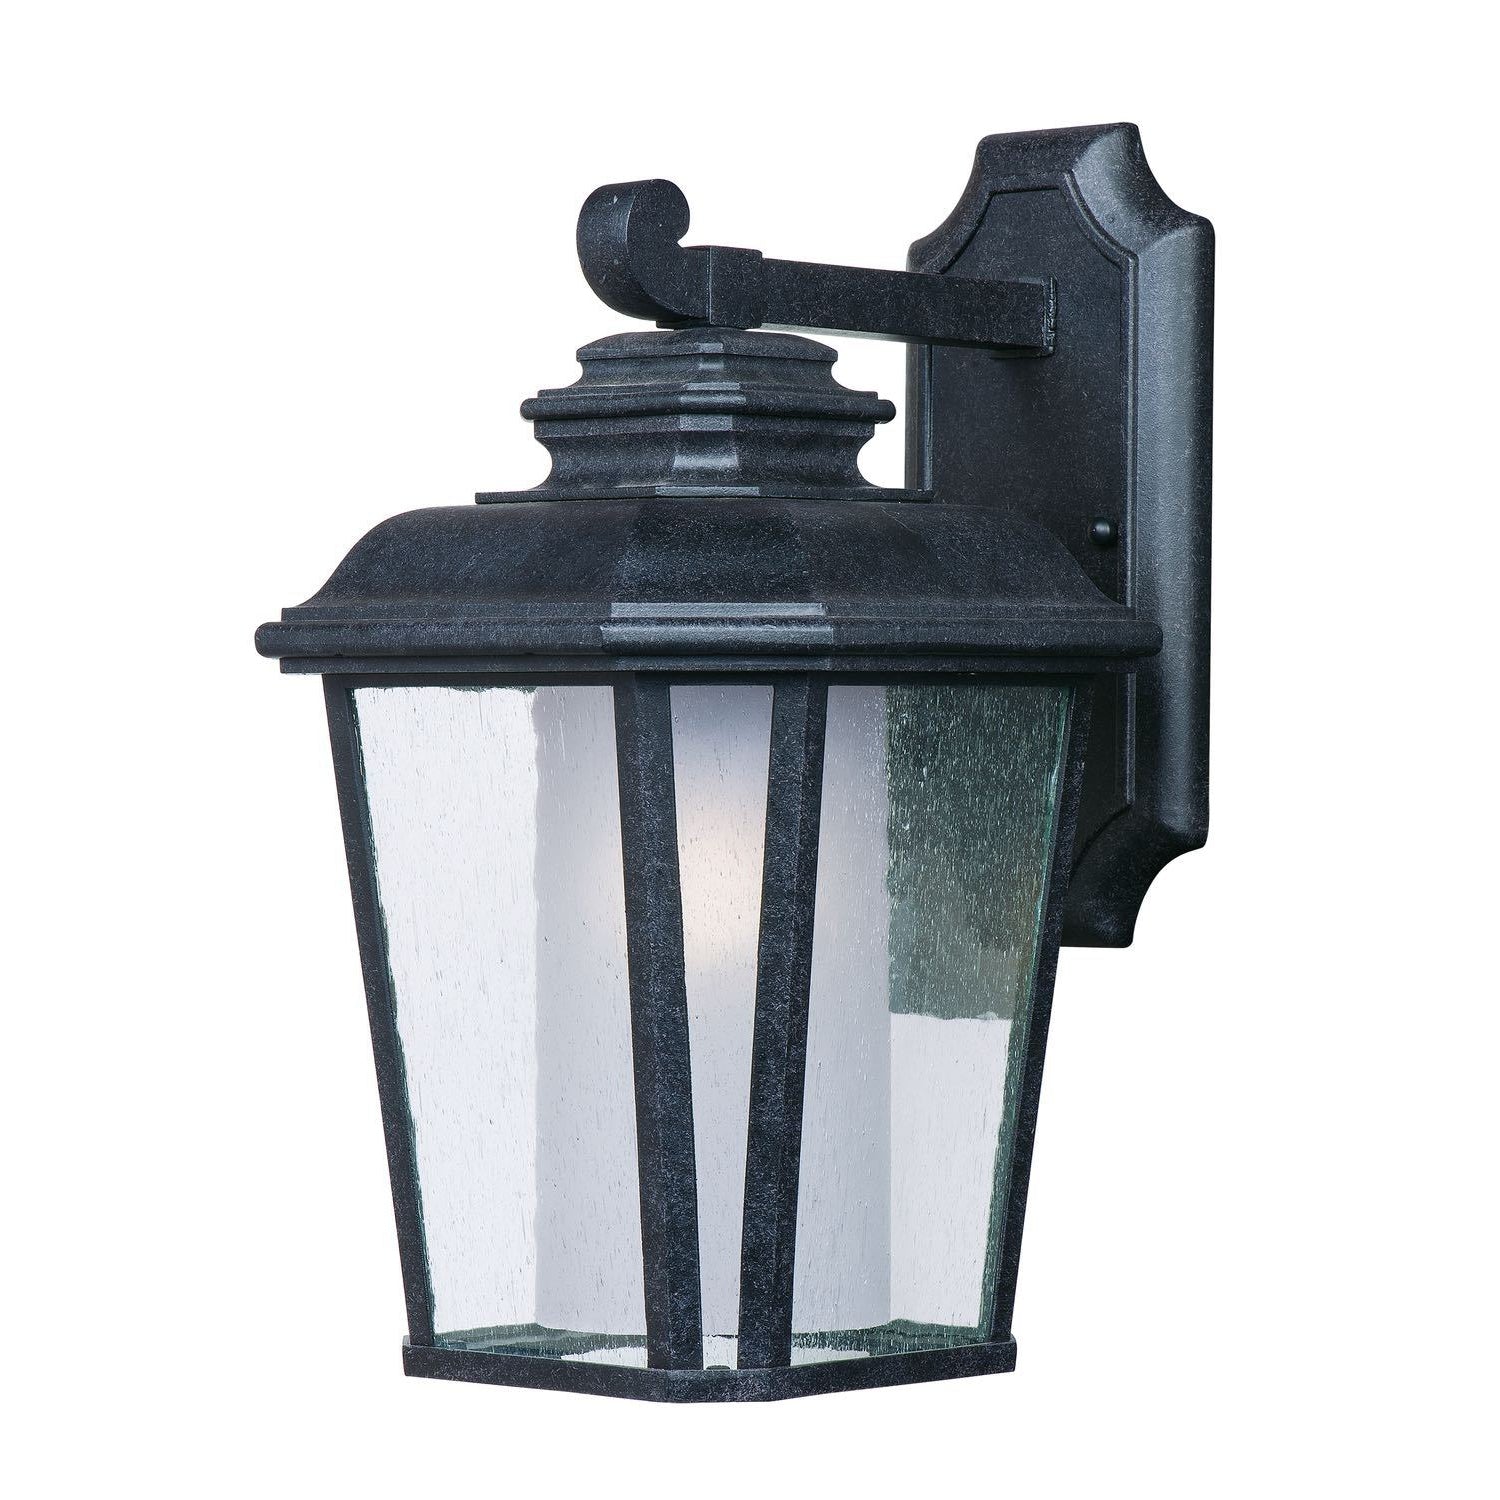 Radcliffe EE (Disc) Outdoor Wall Light Black Oxide